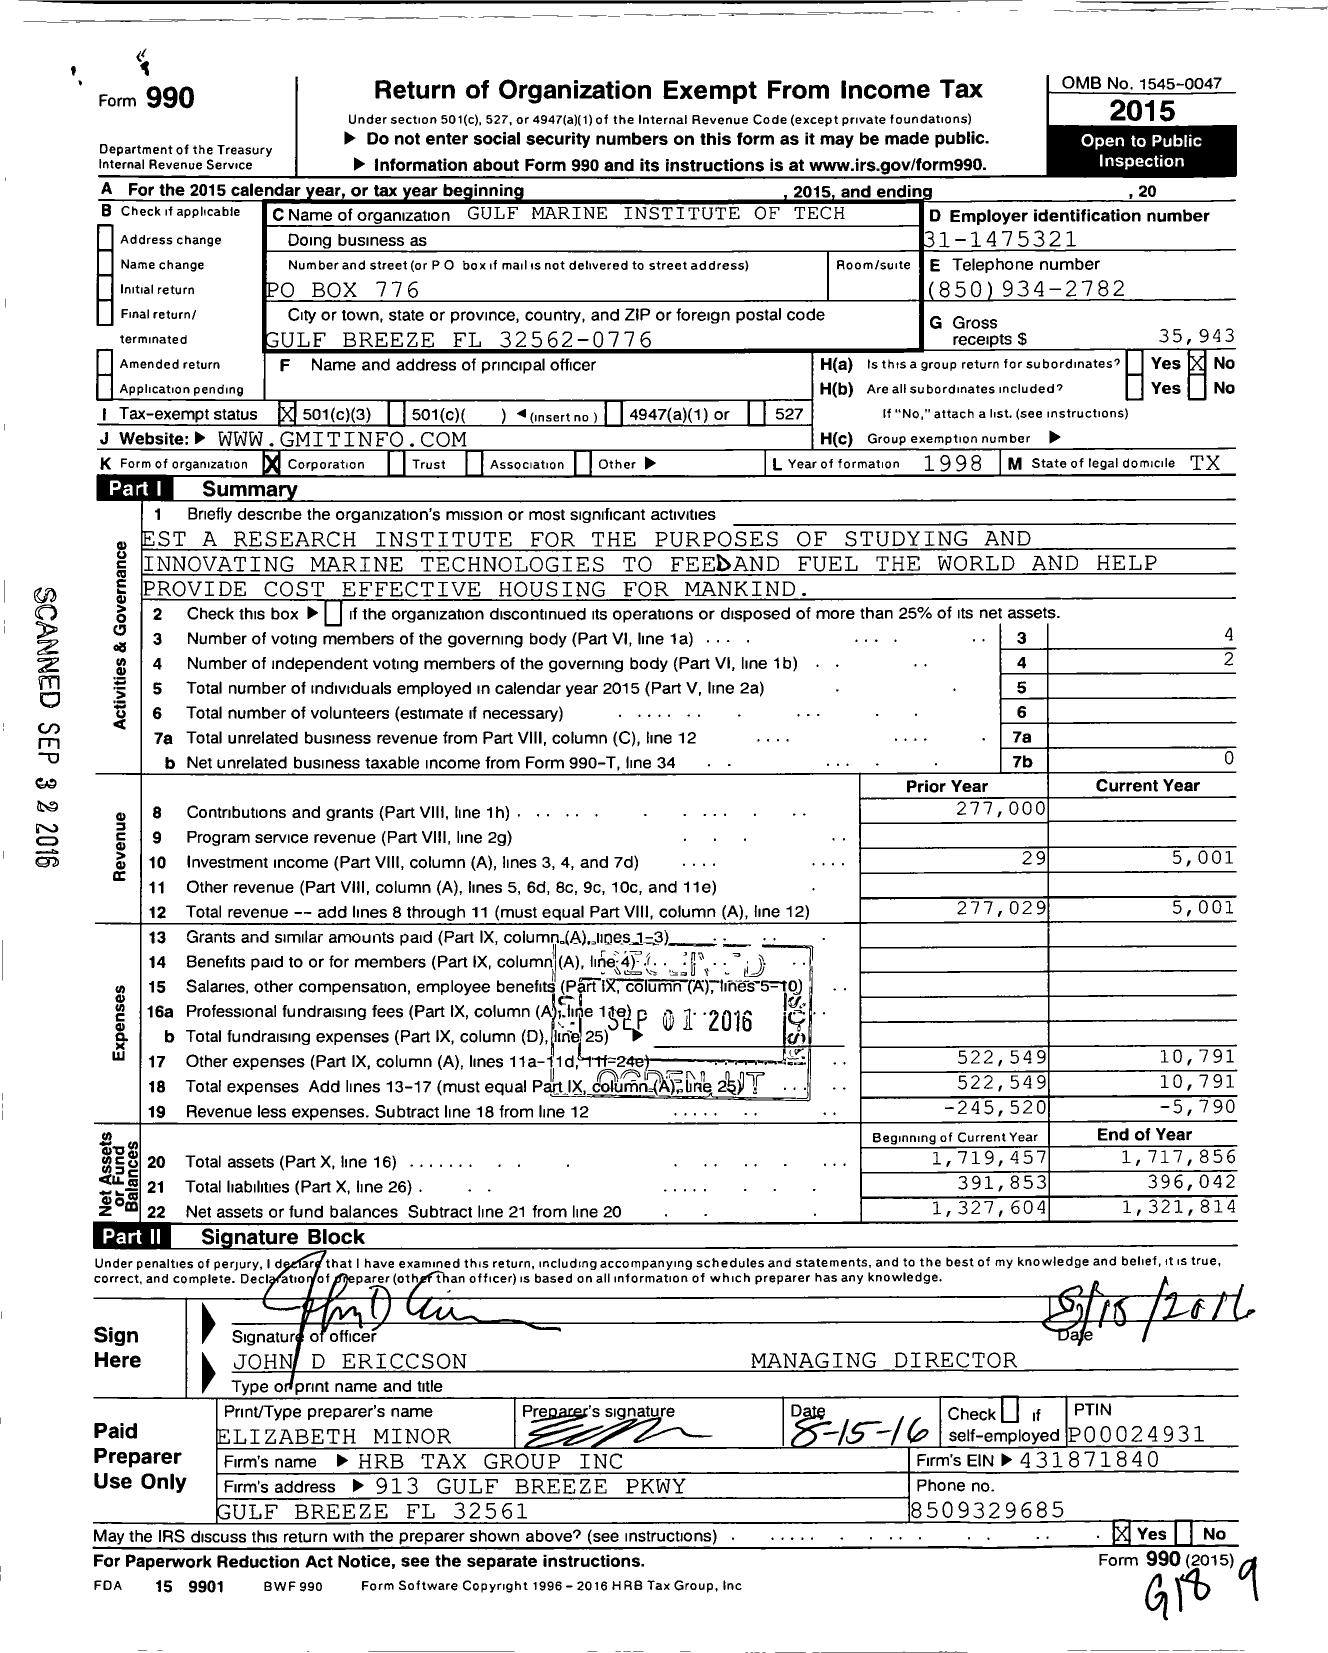 Image of first page of 2015 Form 990 for Gulf Marine Institute of Technology